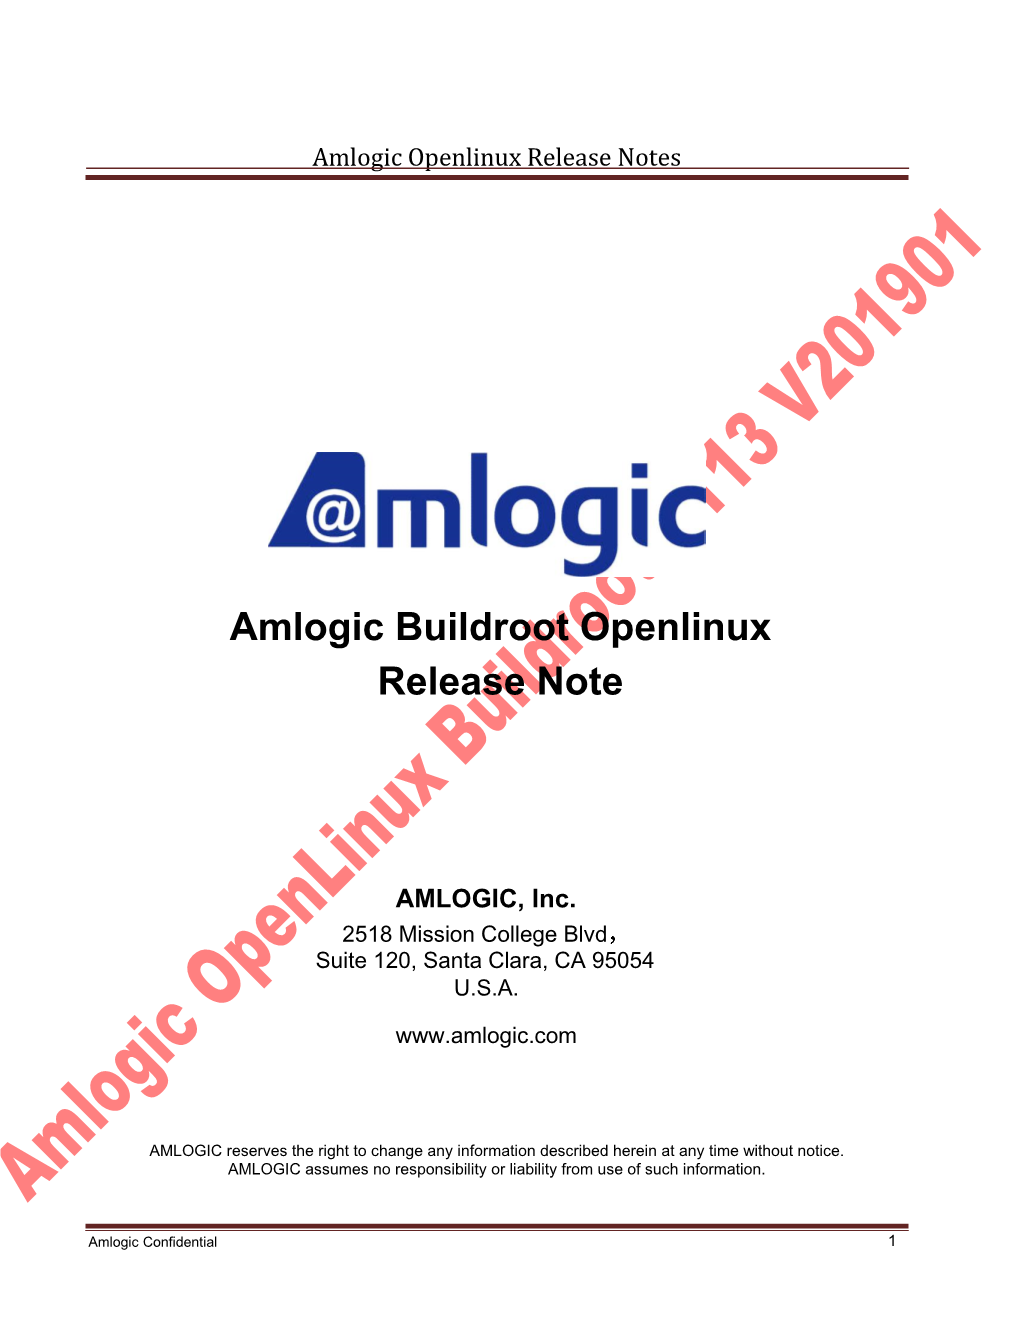 Amlogic Buildroot Openlinux Release Note